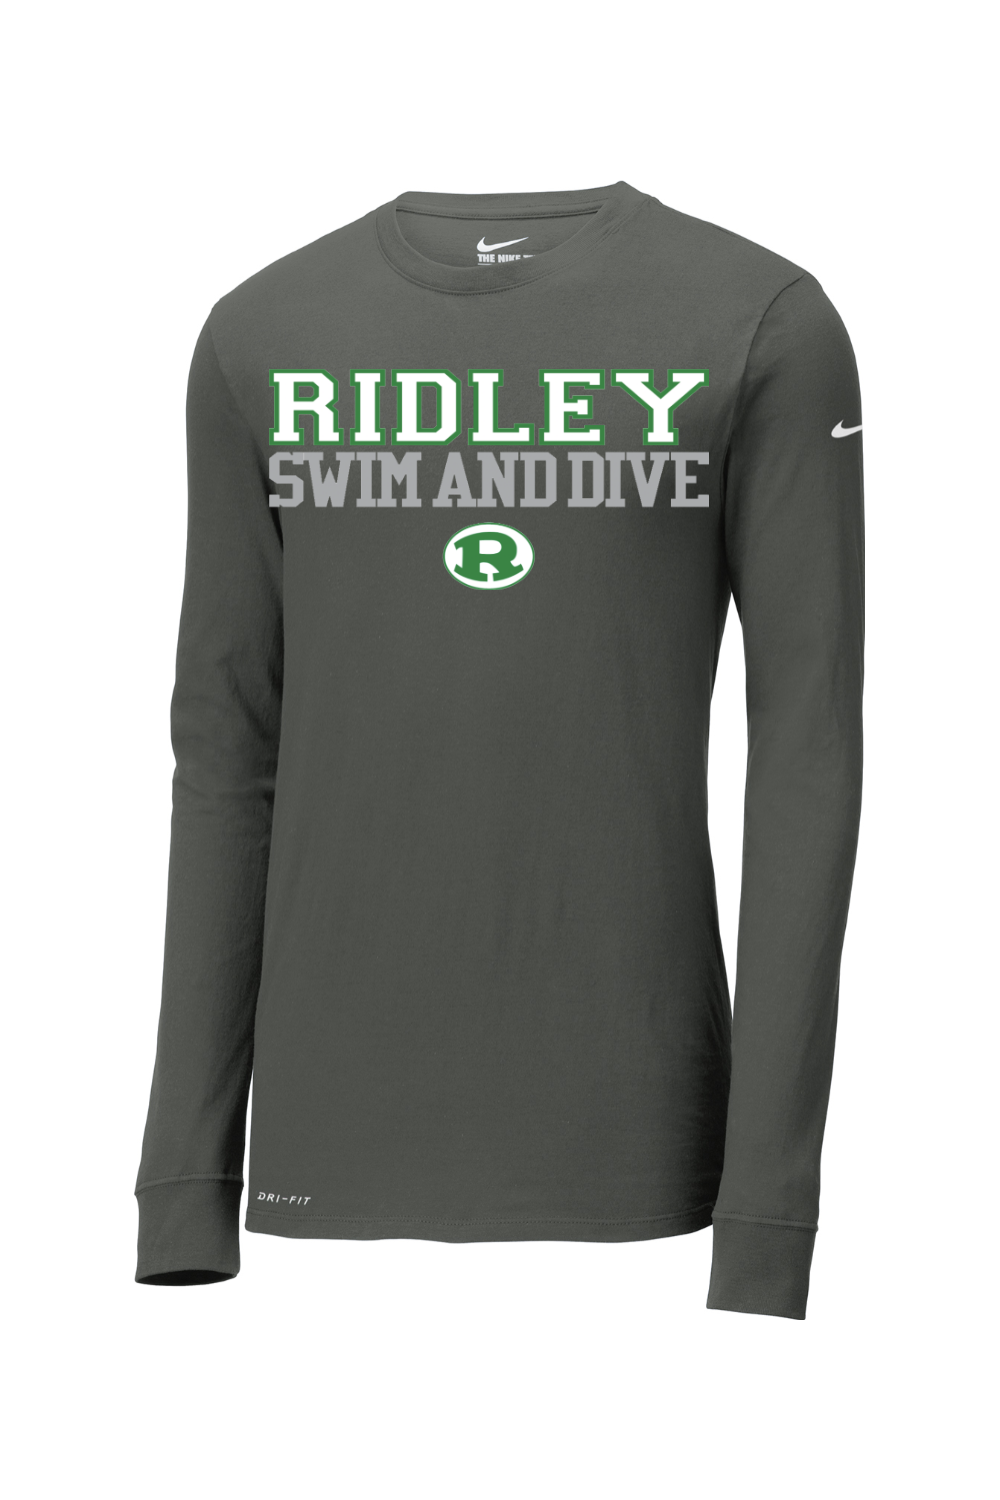 Ridley Swim and Dive Nike Dri-FIT Cotton/Poly Long Sleeve Tee